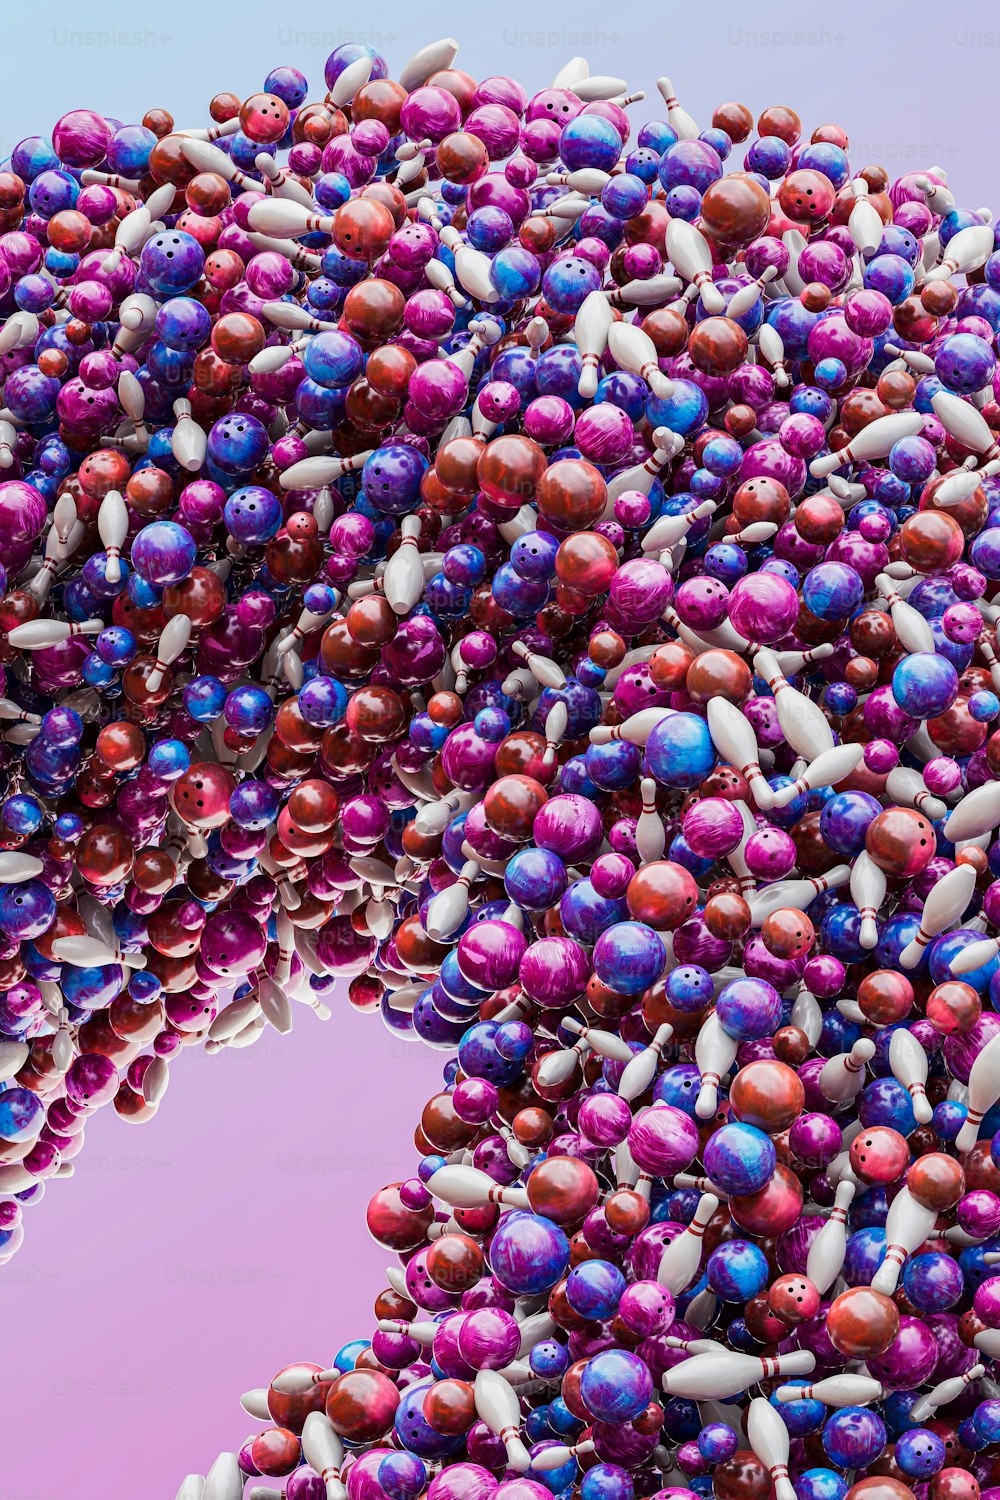 a large group of beads on a pink background